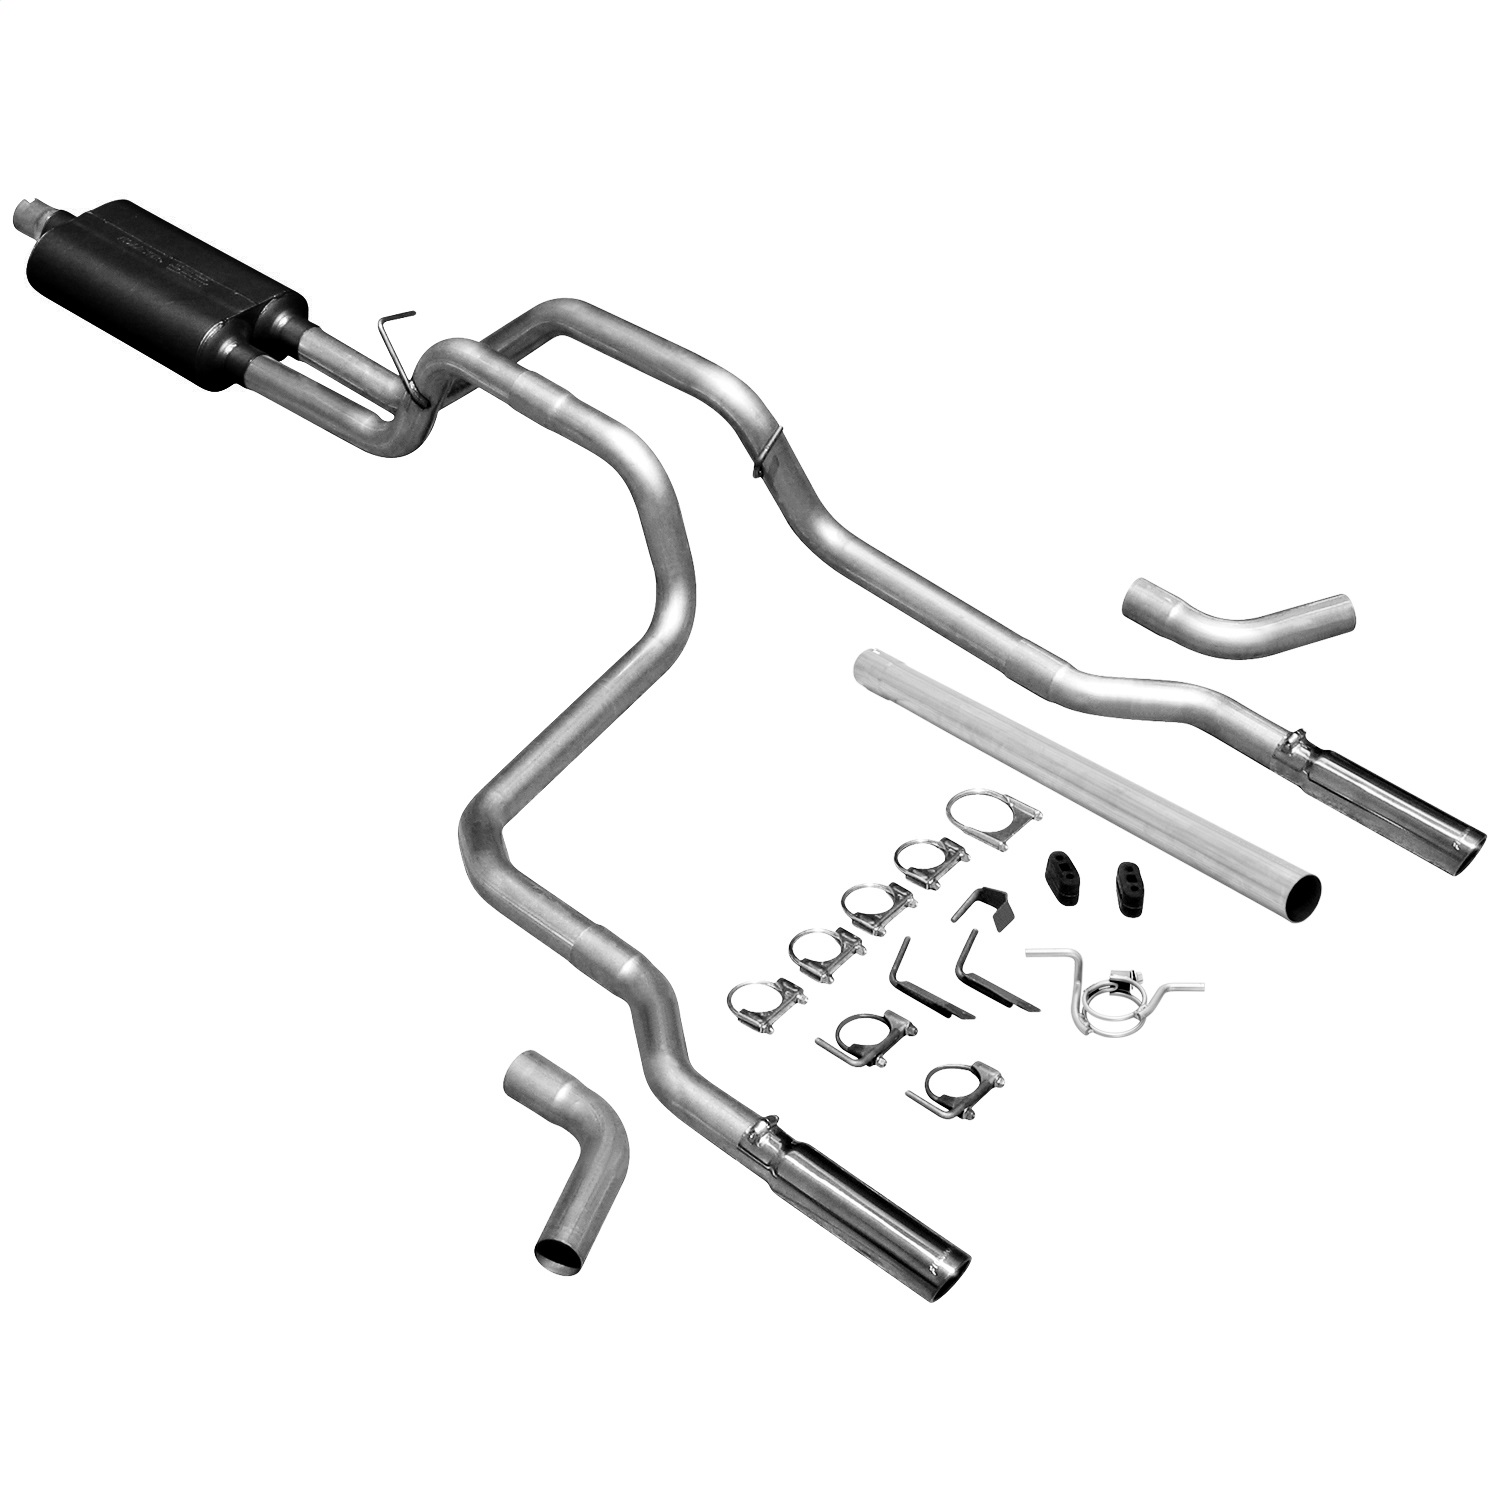 Flowmaster Flowmaster 17429 American Thunder Cat Back Exhaust System Fits 94-01 Ram 1500